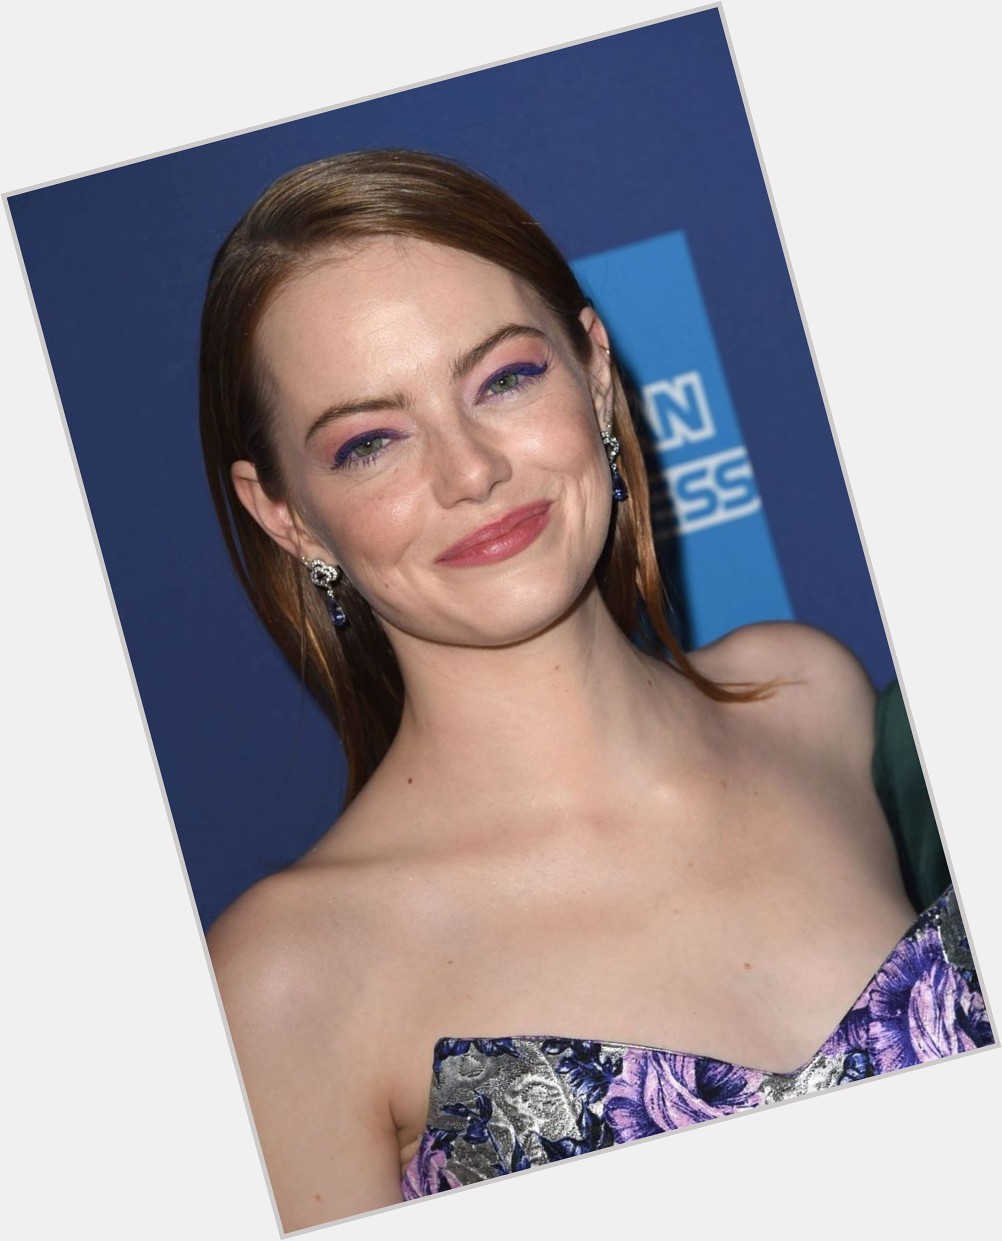 Happy birthday to my favorite person in the whole world i love you emma stone    